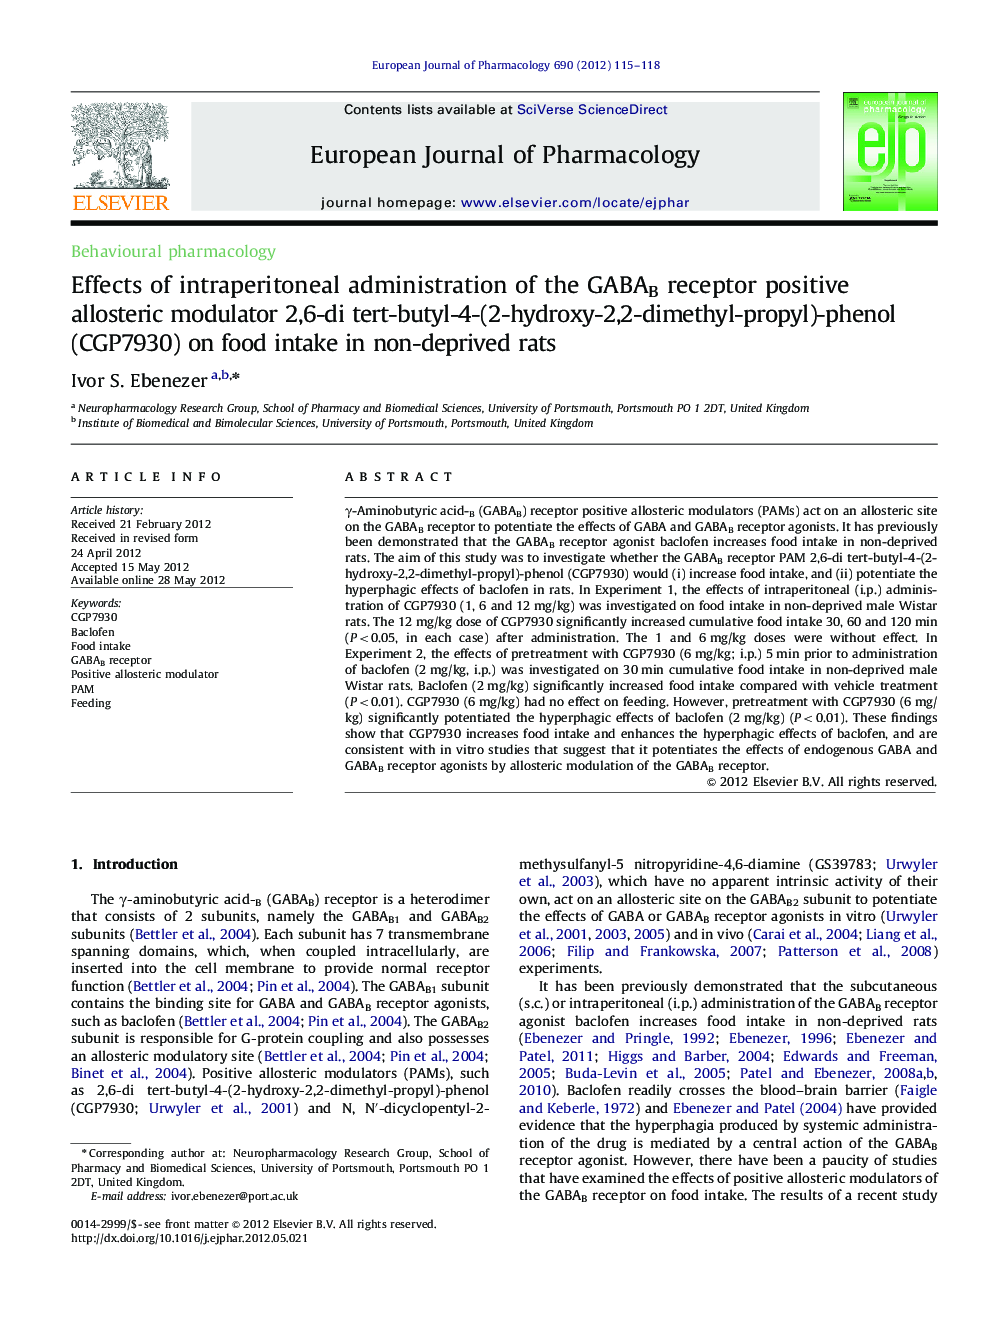 Effects of intraperitoneal administration of the GABAB receptor positive allosteric modulator 2,6-di tert-butyl-4-(2-hydroxy-2,2-dimethyl-propyl)-phenol (CGP7930) on food intake in non-deprived rats